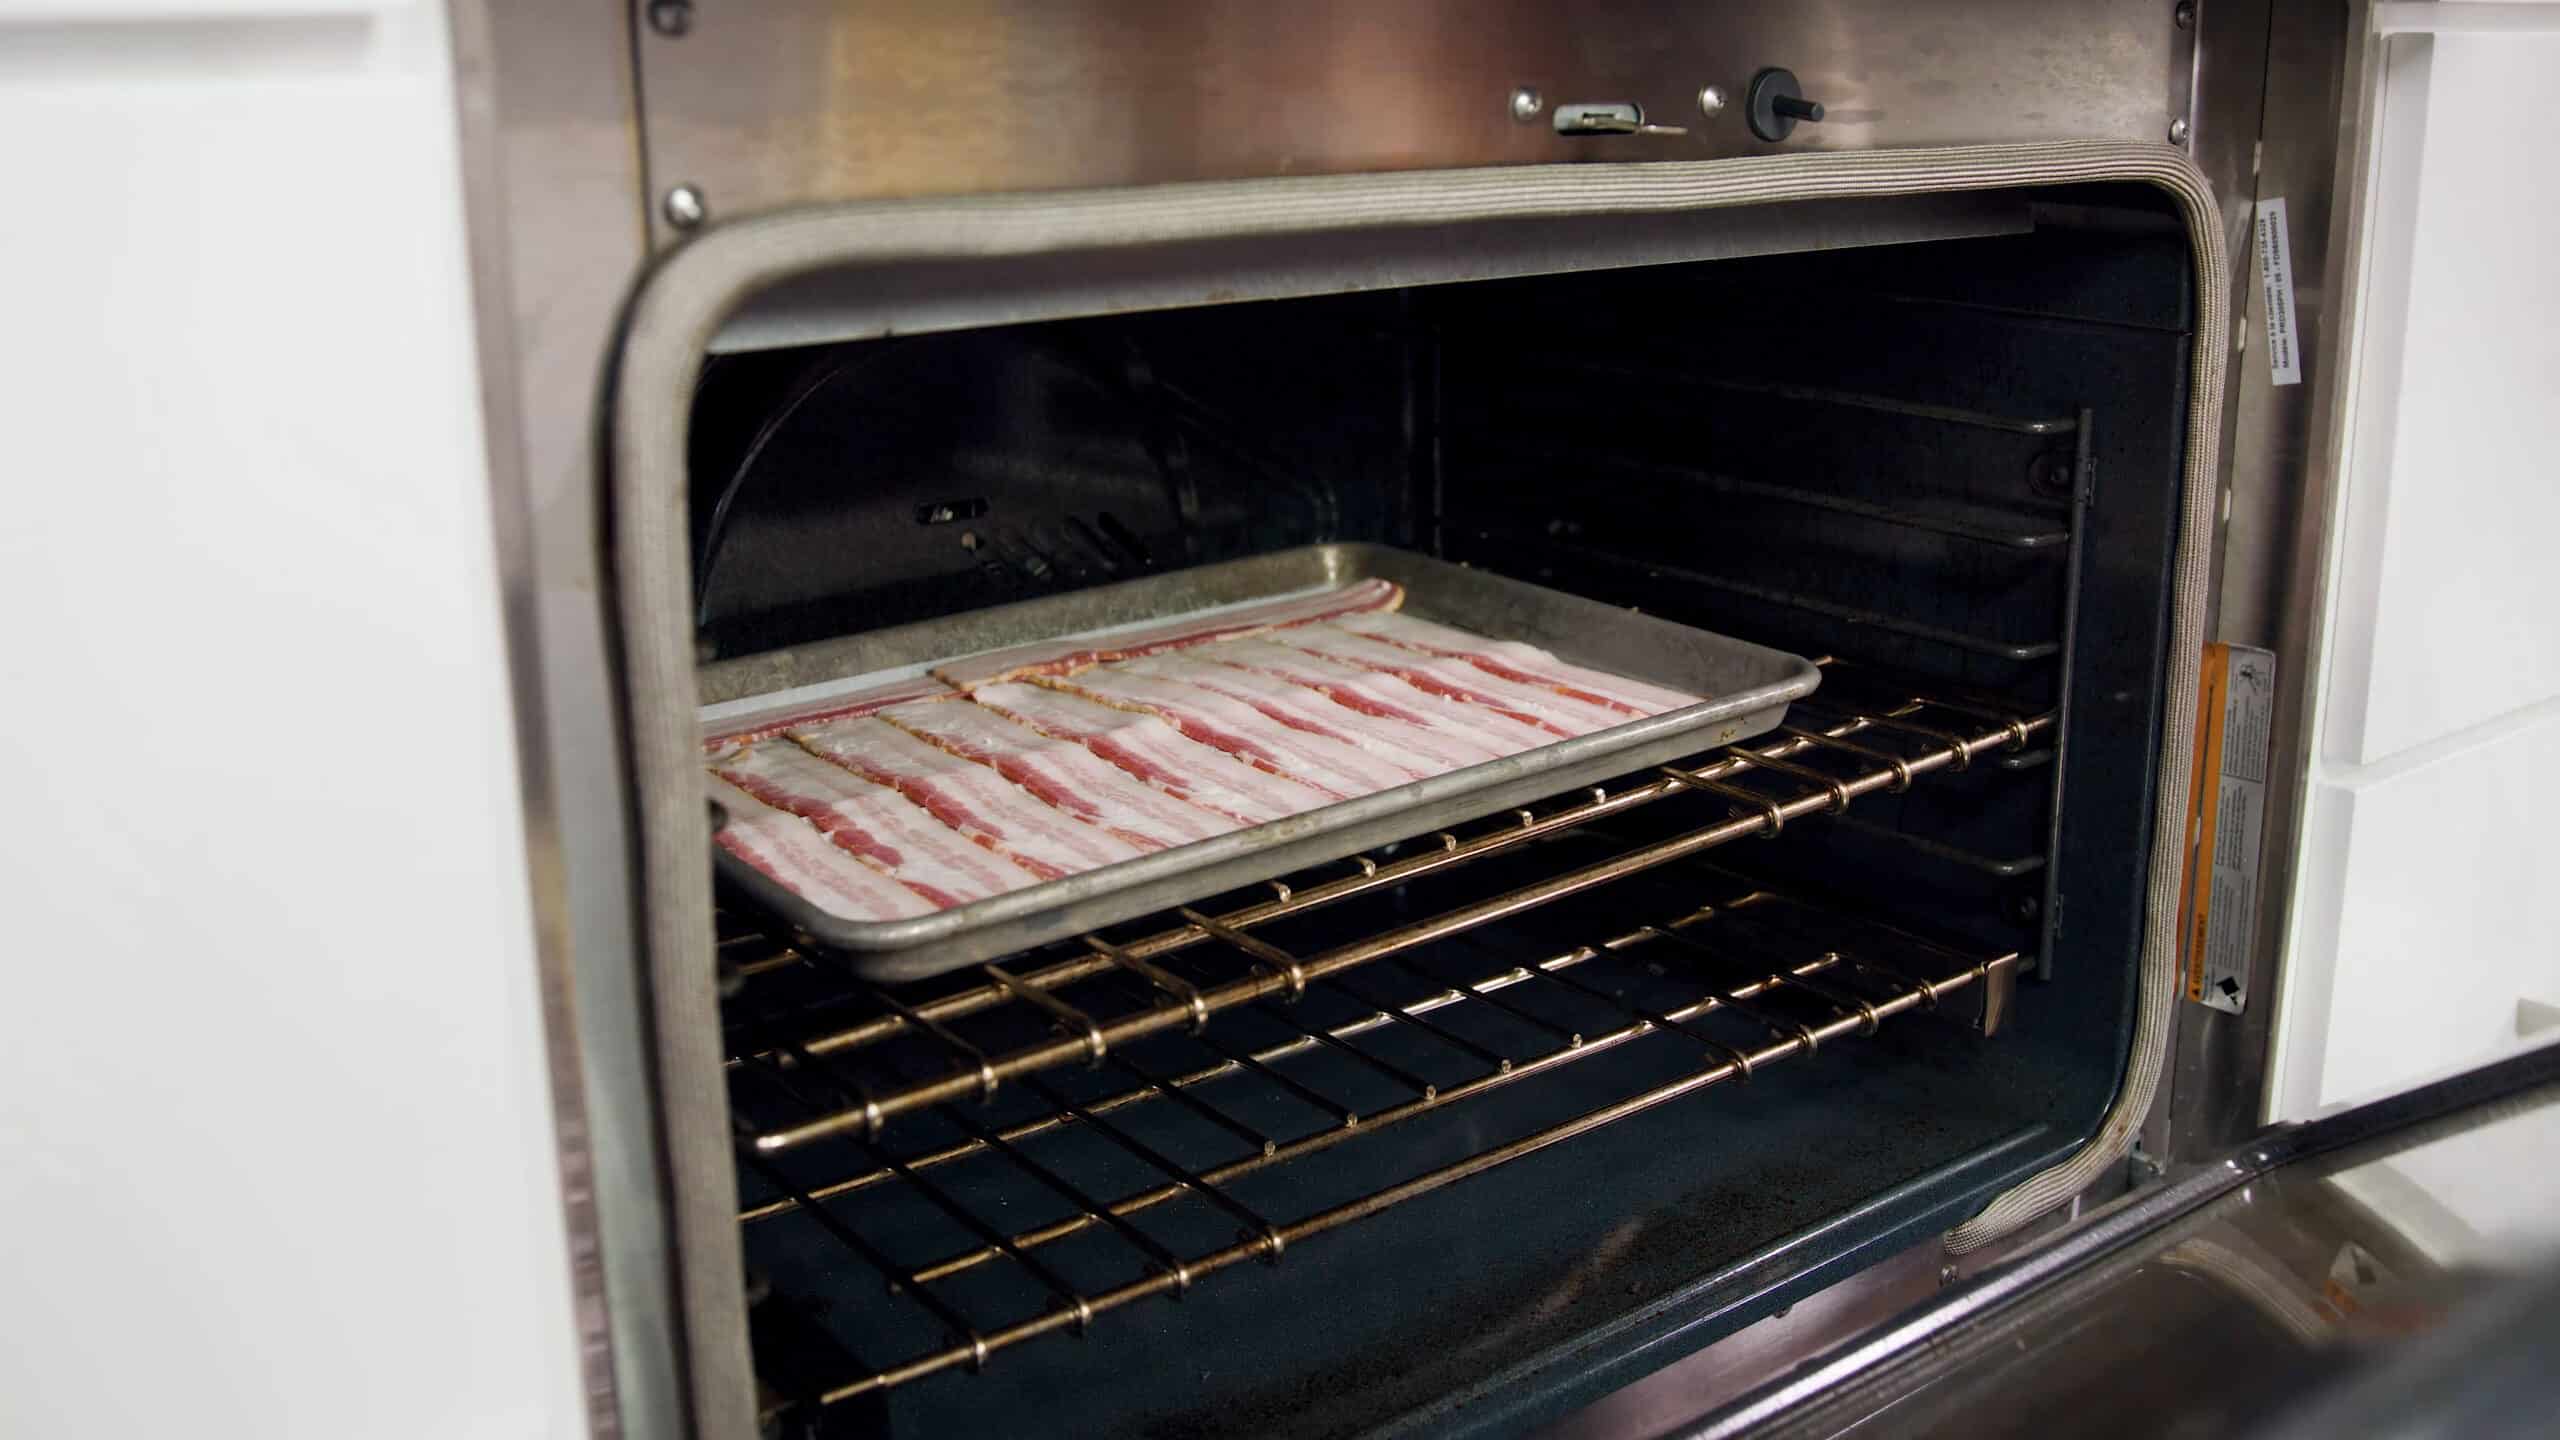 Angled view of an open oven with a metal baking sheet lined with parchment paper and lined with bacon placed on a. metal rack in the middle of the oven.